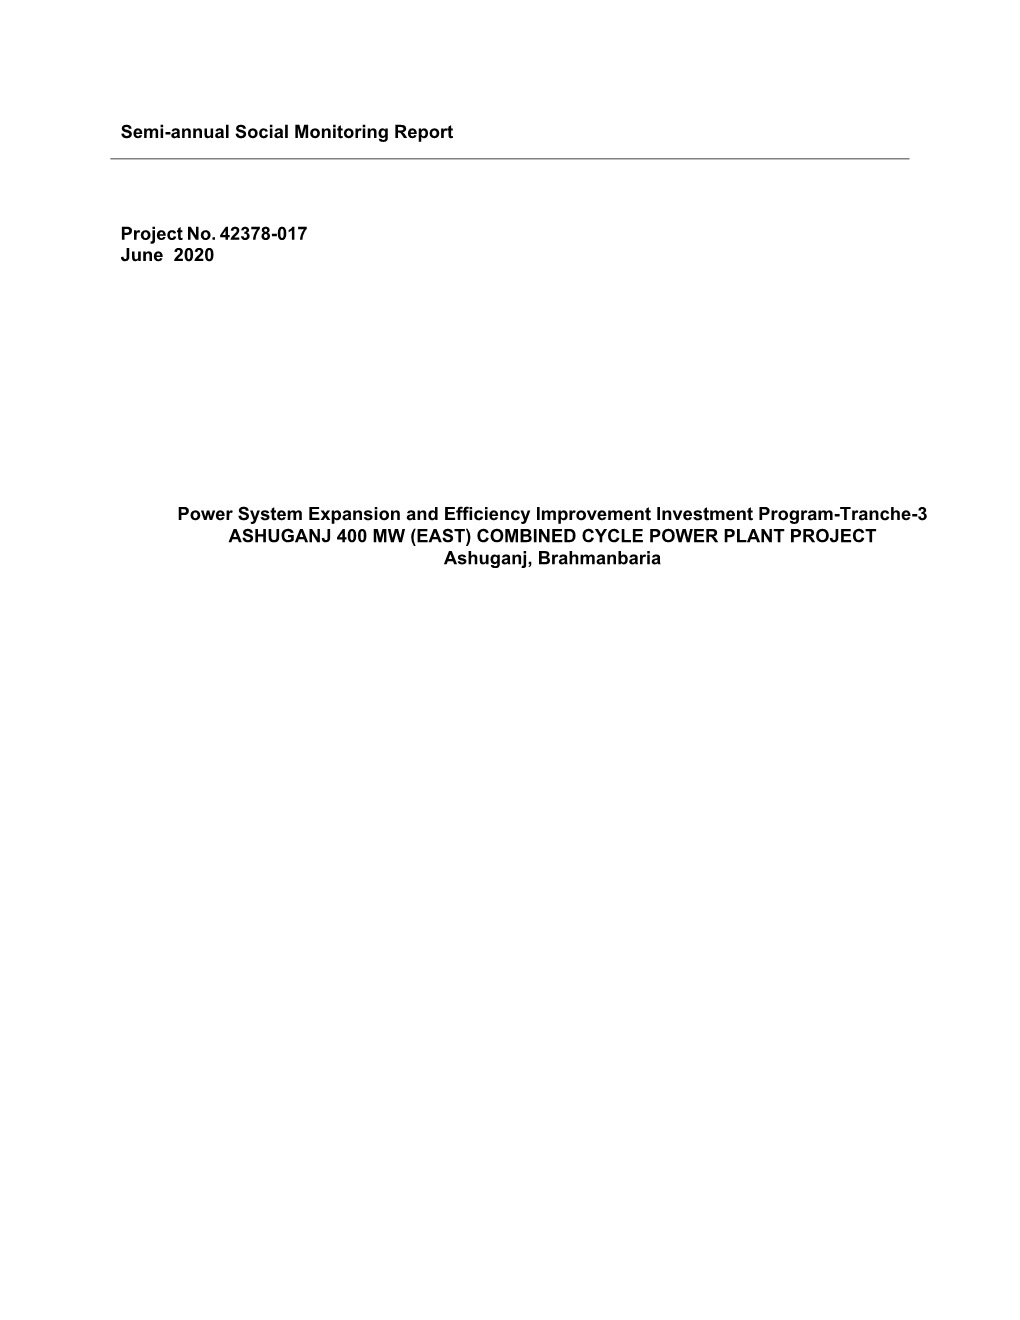 42378-017: Power System Expansion And